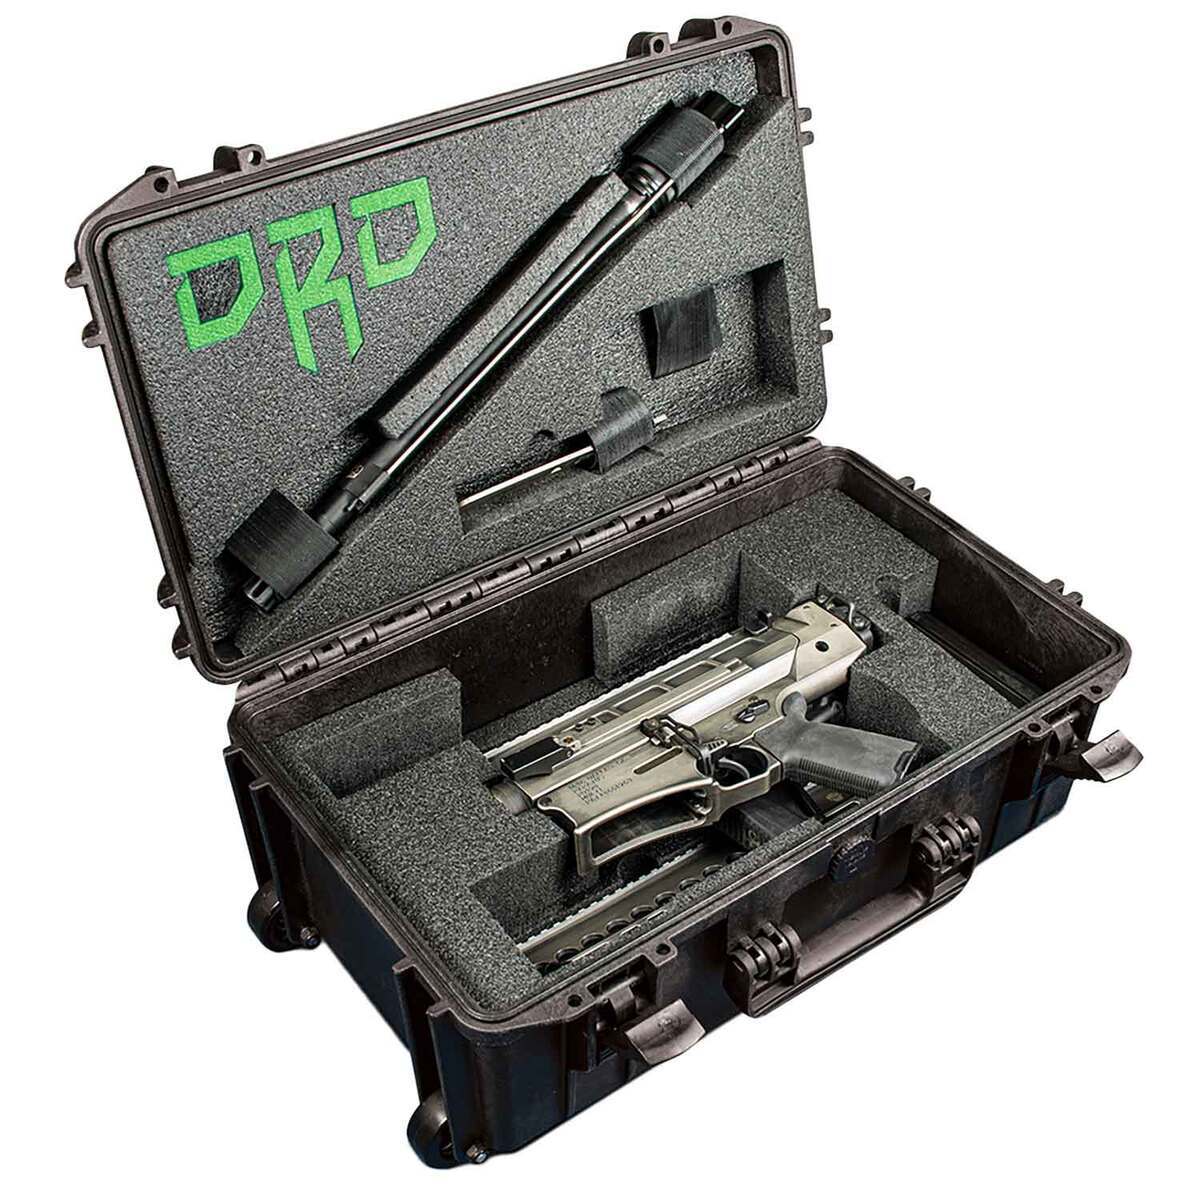 DRD Tactical Paratus 6.5 Creedmoor Semi-Auto Rifle - 60 Second Assembly!-img-2